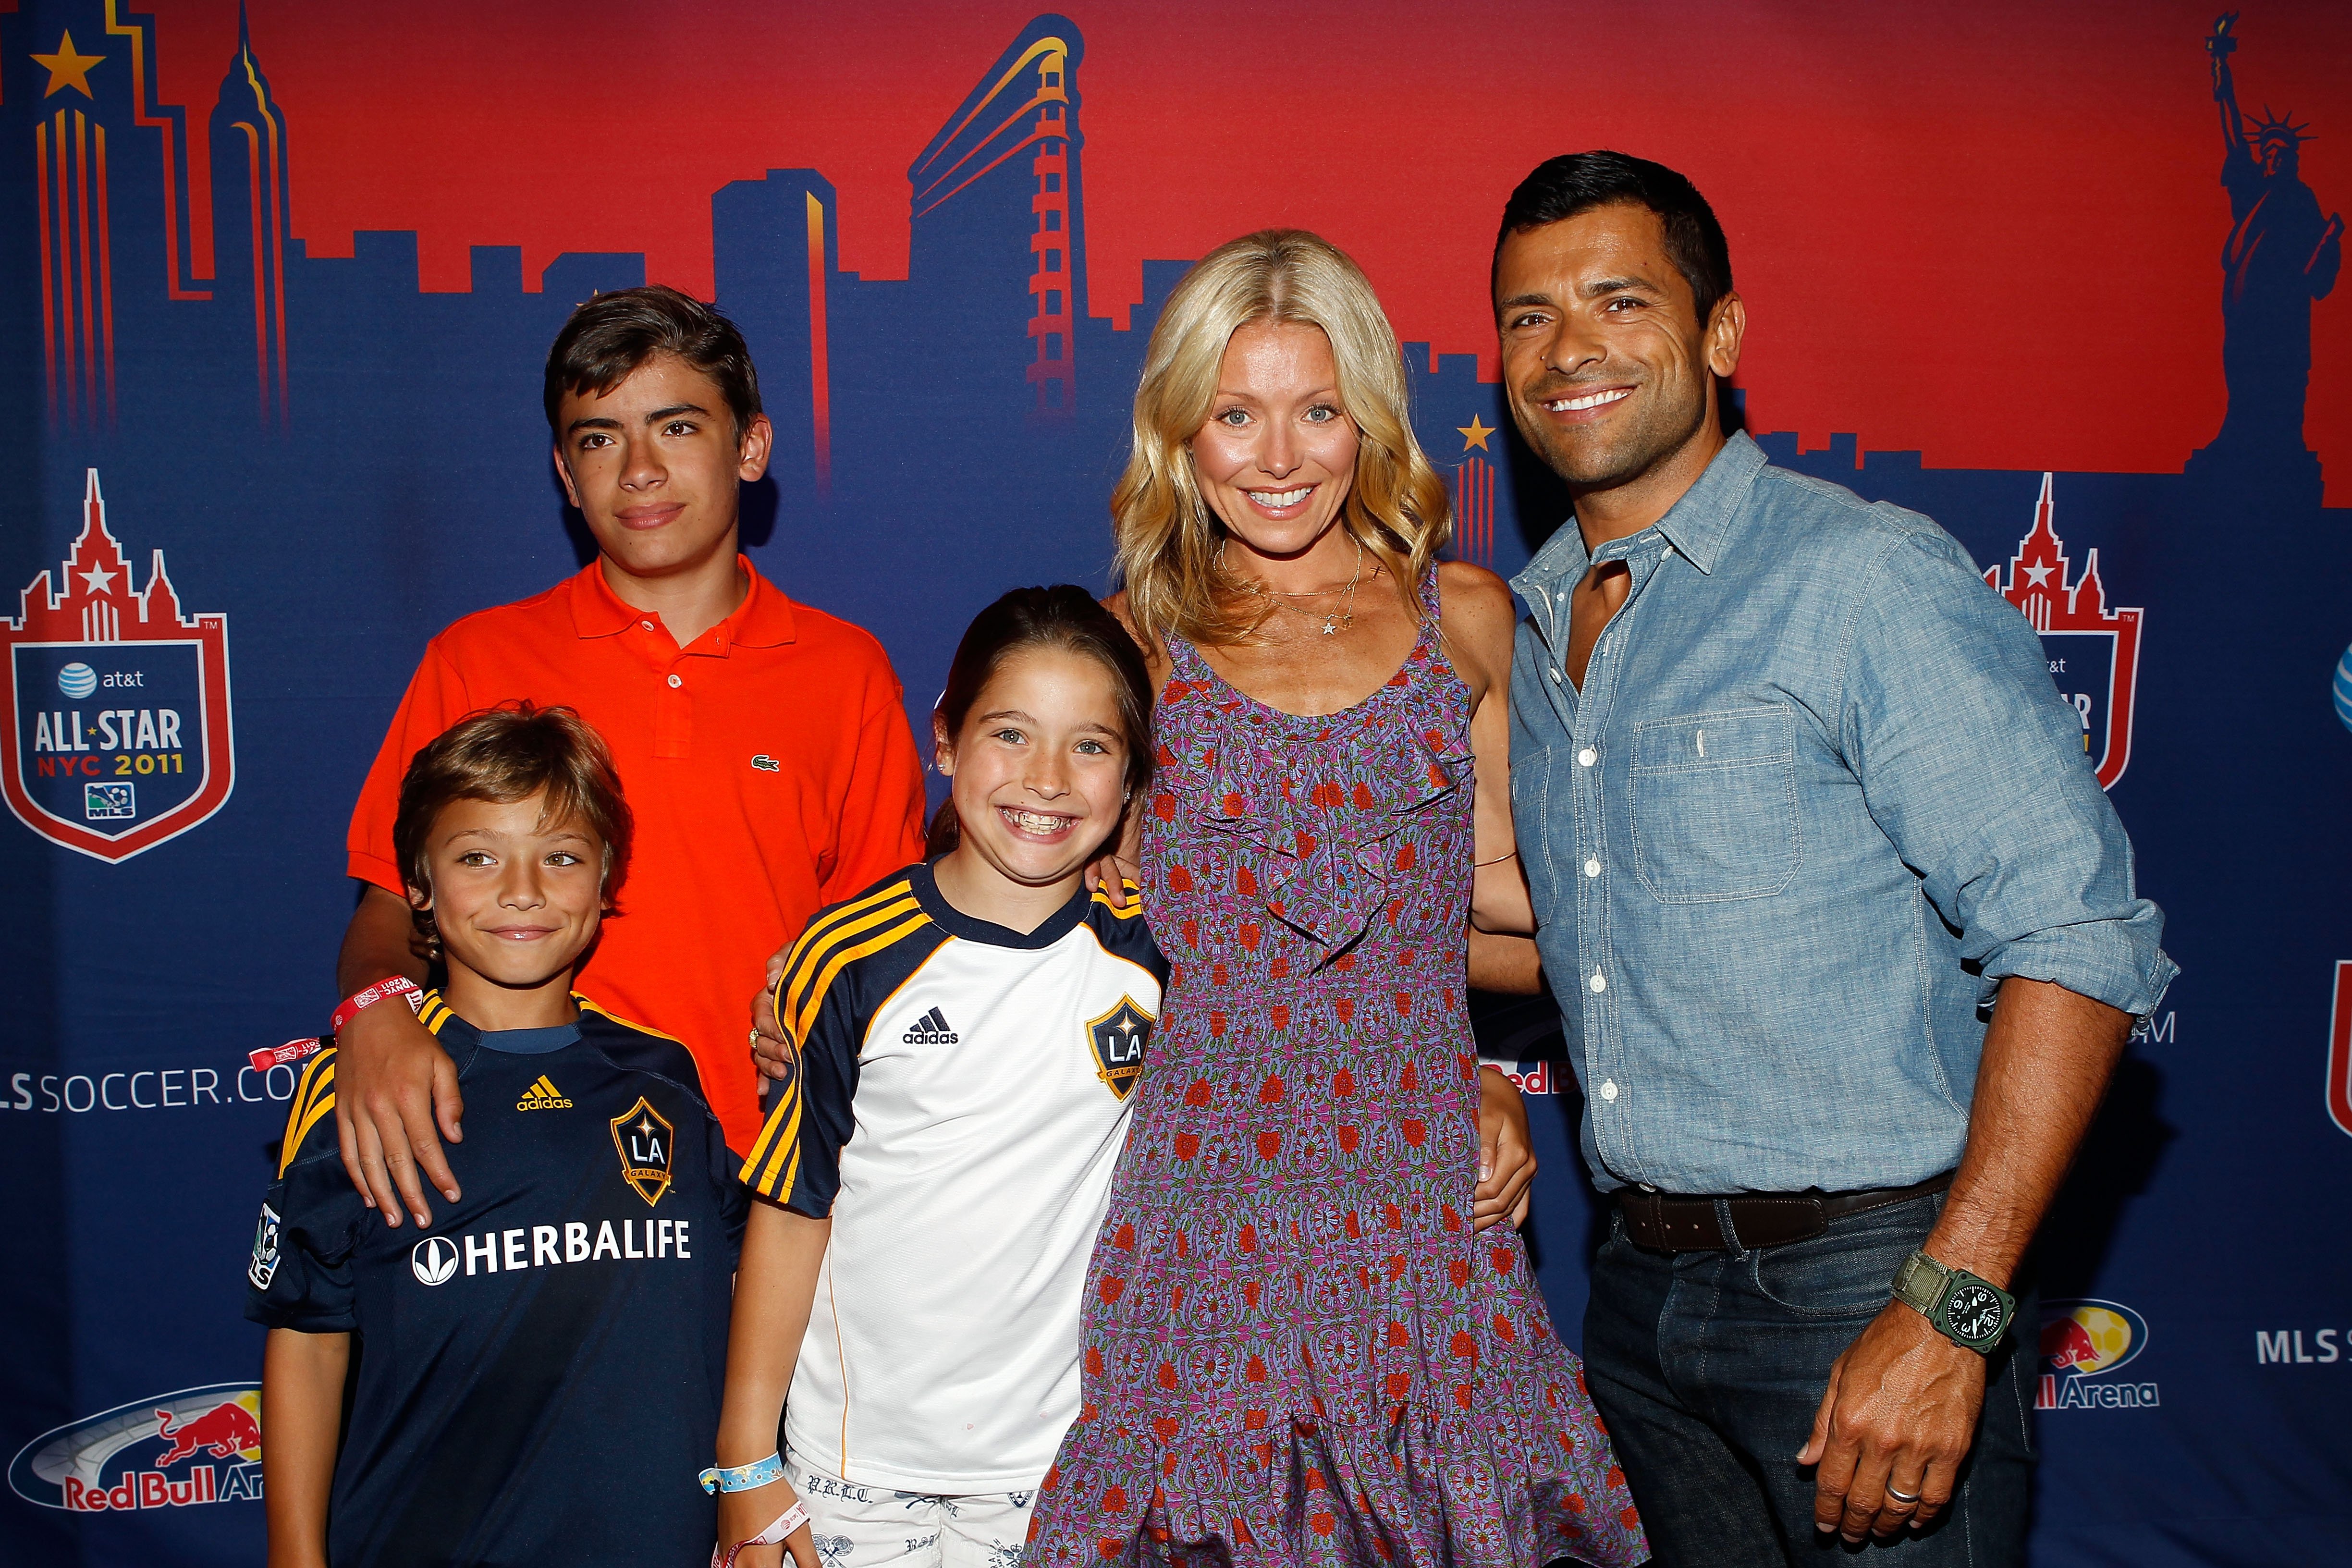 Kelly Ripa (2nd R), her husband Mark Consuelos (R) and their kids smiles for a photo prior to the MLS All-Star Game at Red Bull Arena on July 27, 2011 in Harrison, New Jersey. | Source: Getty Images